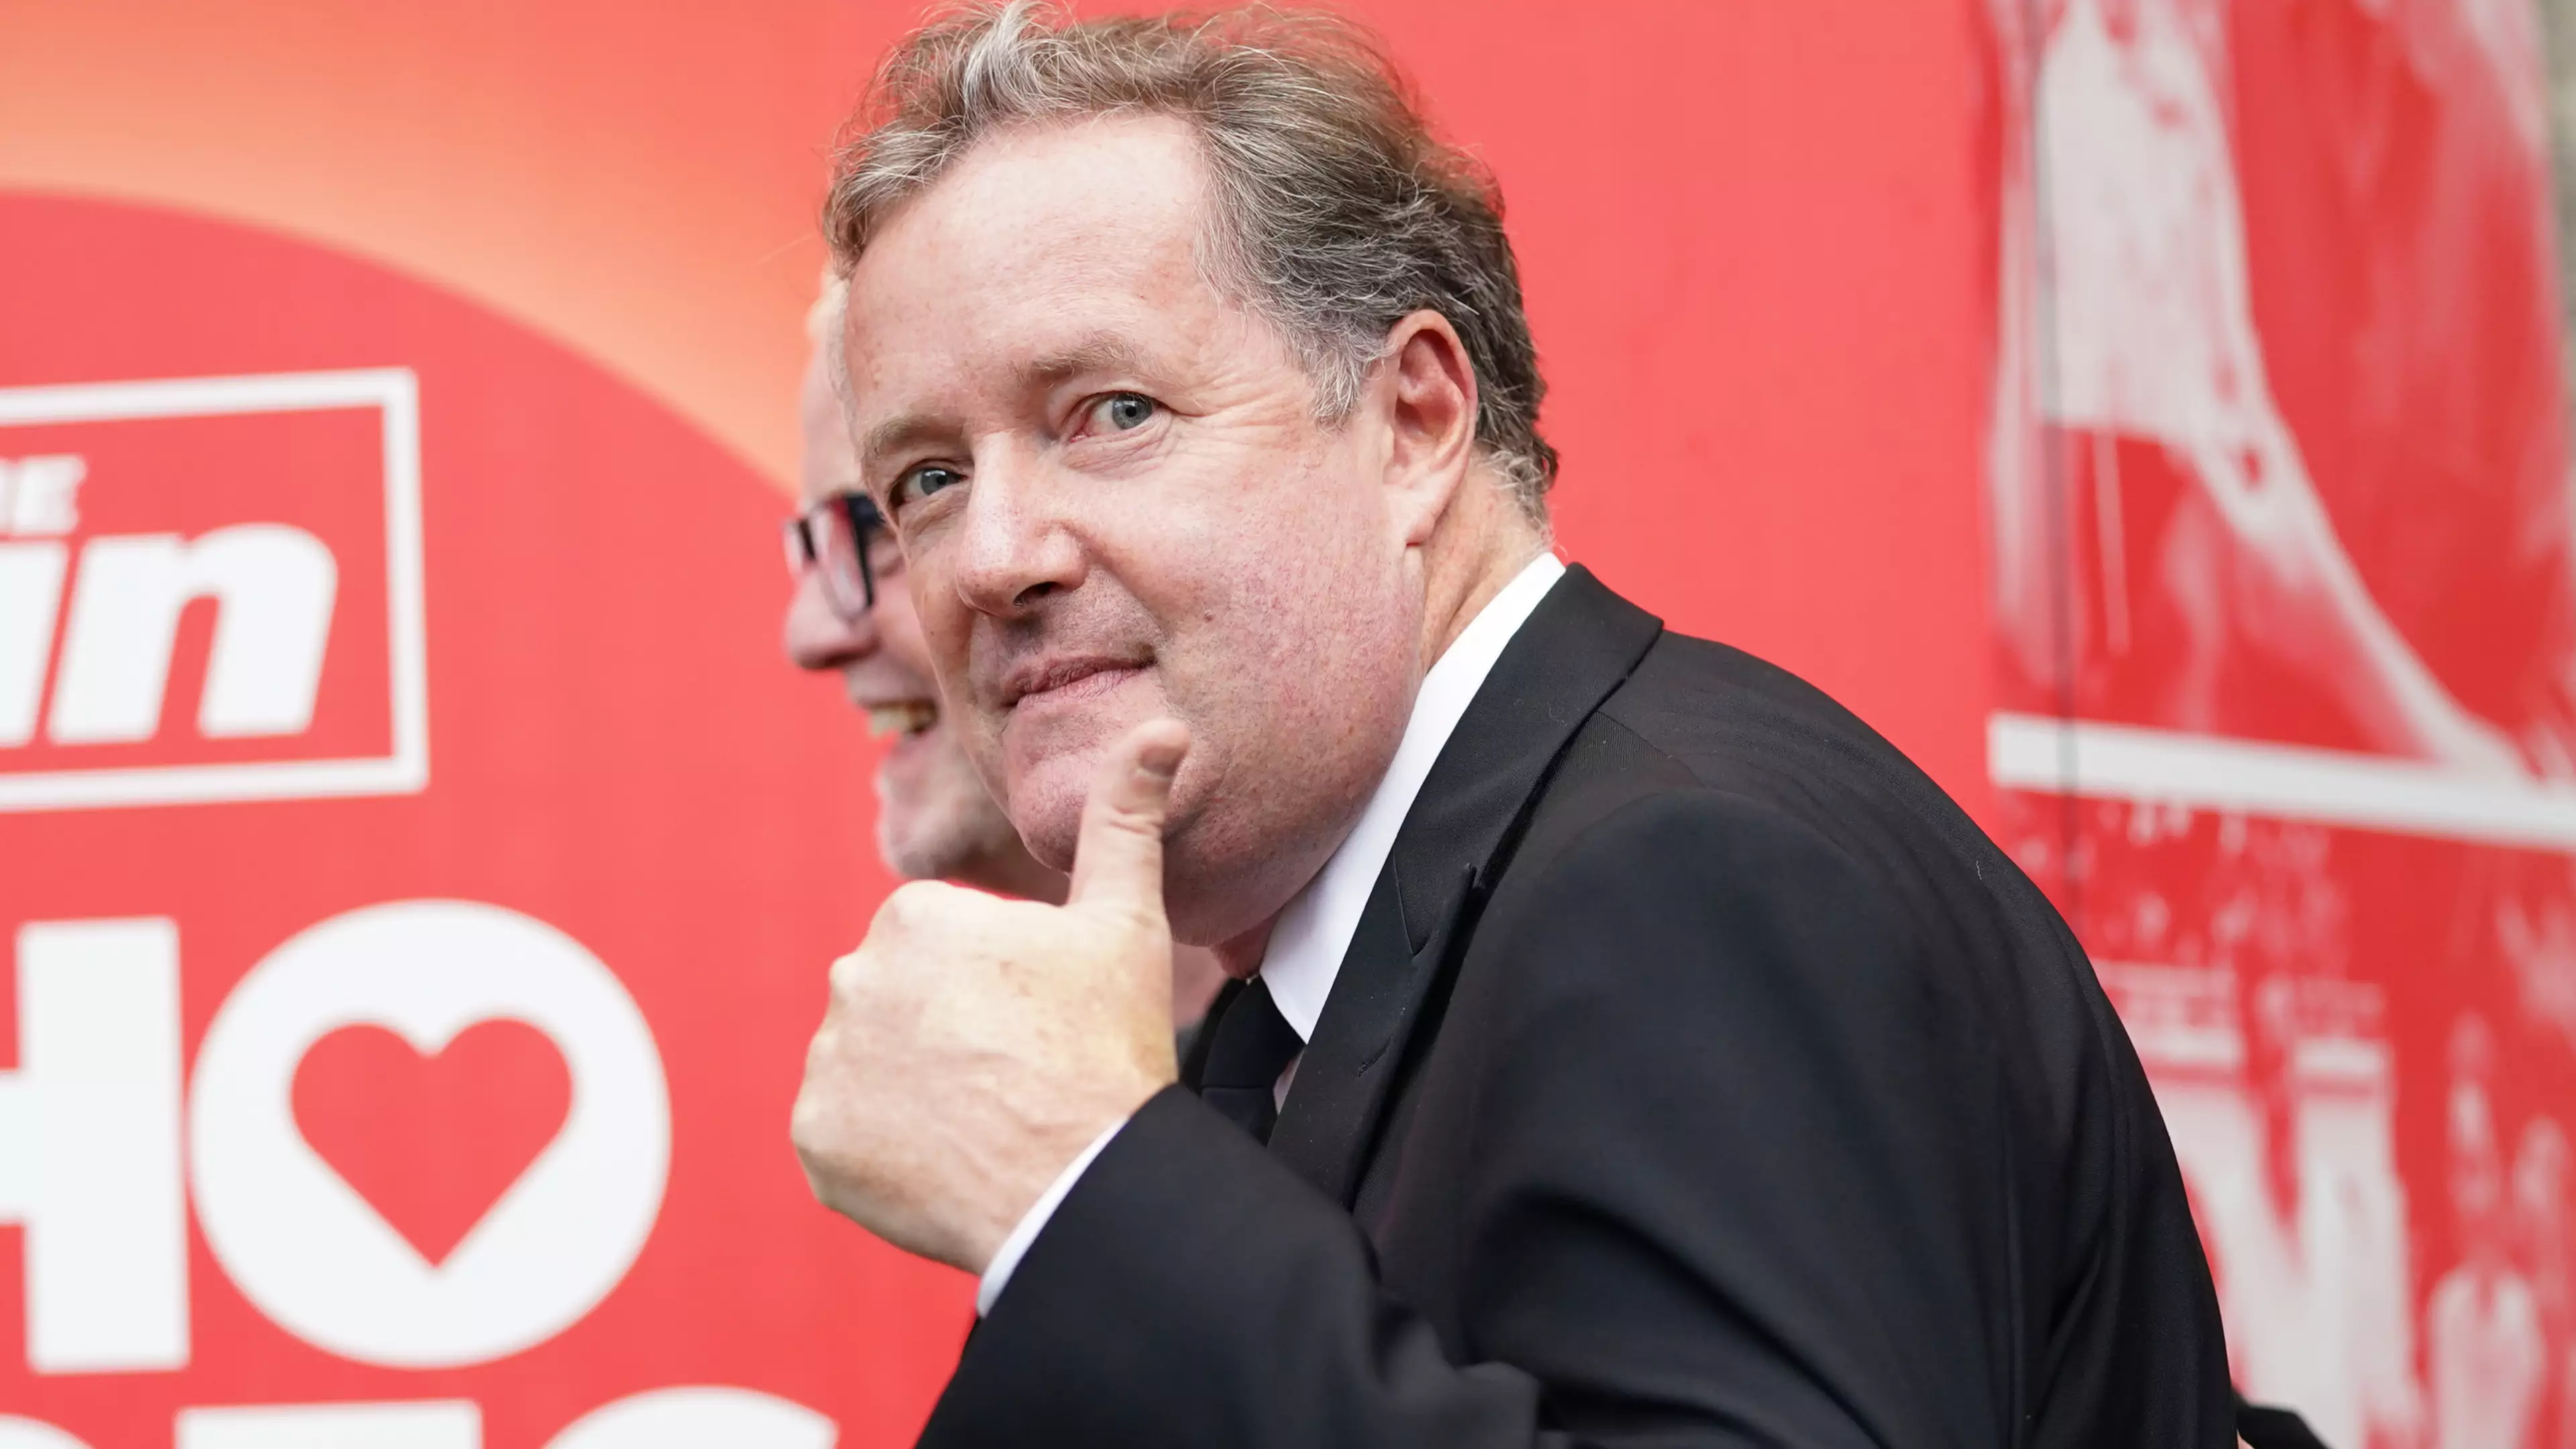 Piers Morgan Had The Most Complained About TV Moment In 2021 